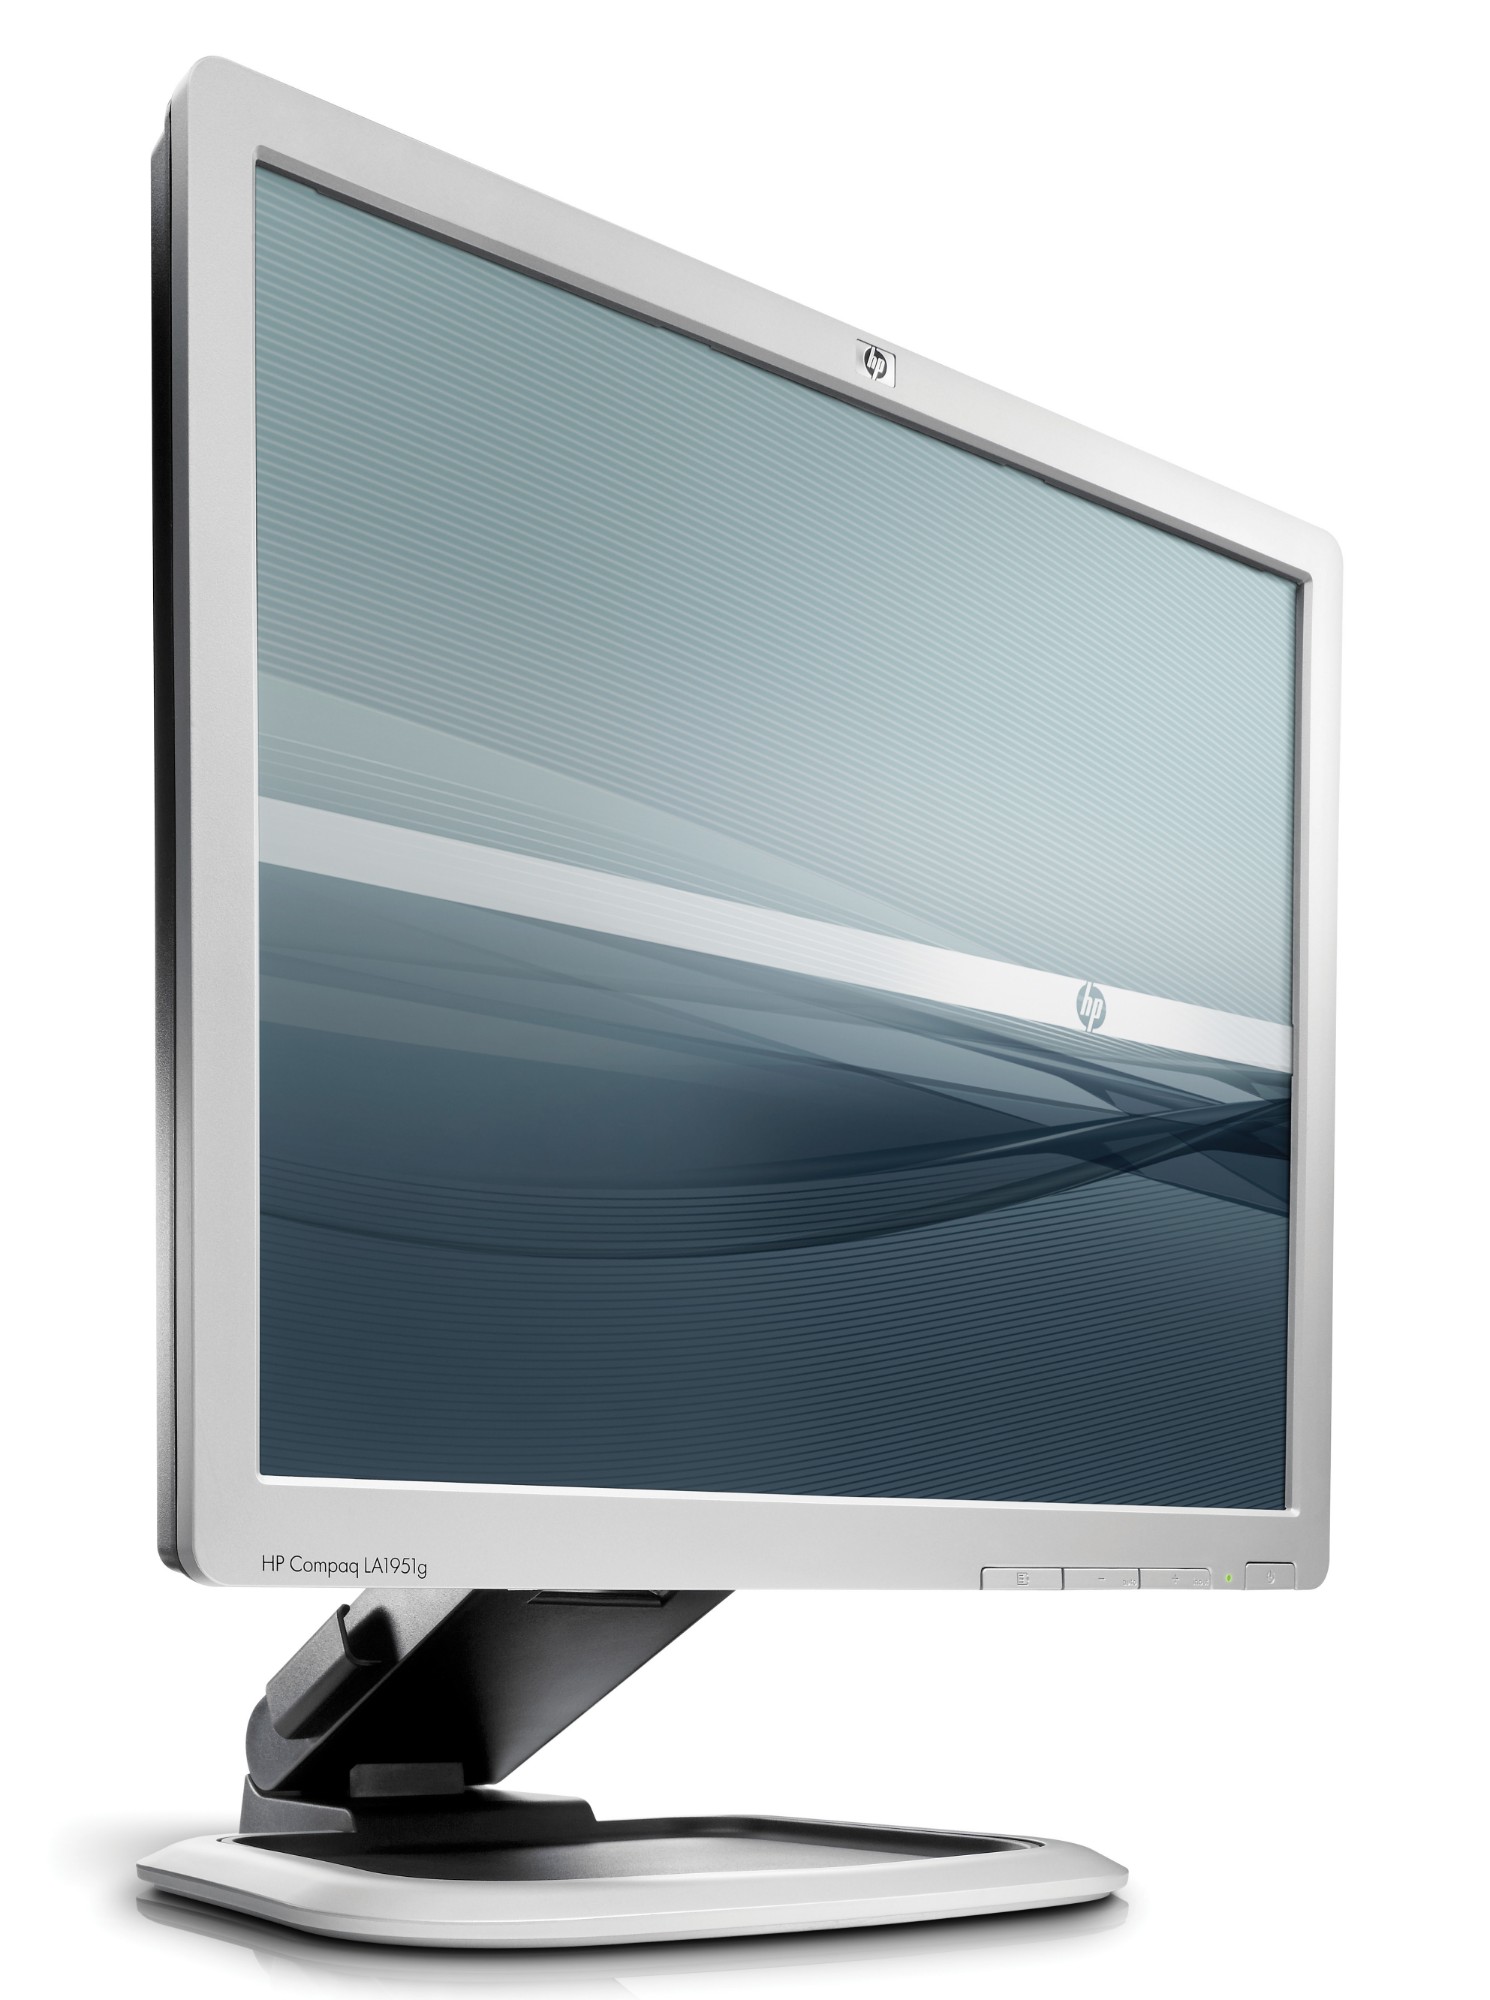 regio Stoffig Een deel HP LA1951g 48.3 cm (19") 1280 x 1024 pixels LED Silver, 197 in  distributor/wholesale stock for resellers to sell - Stock In The Channel